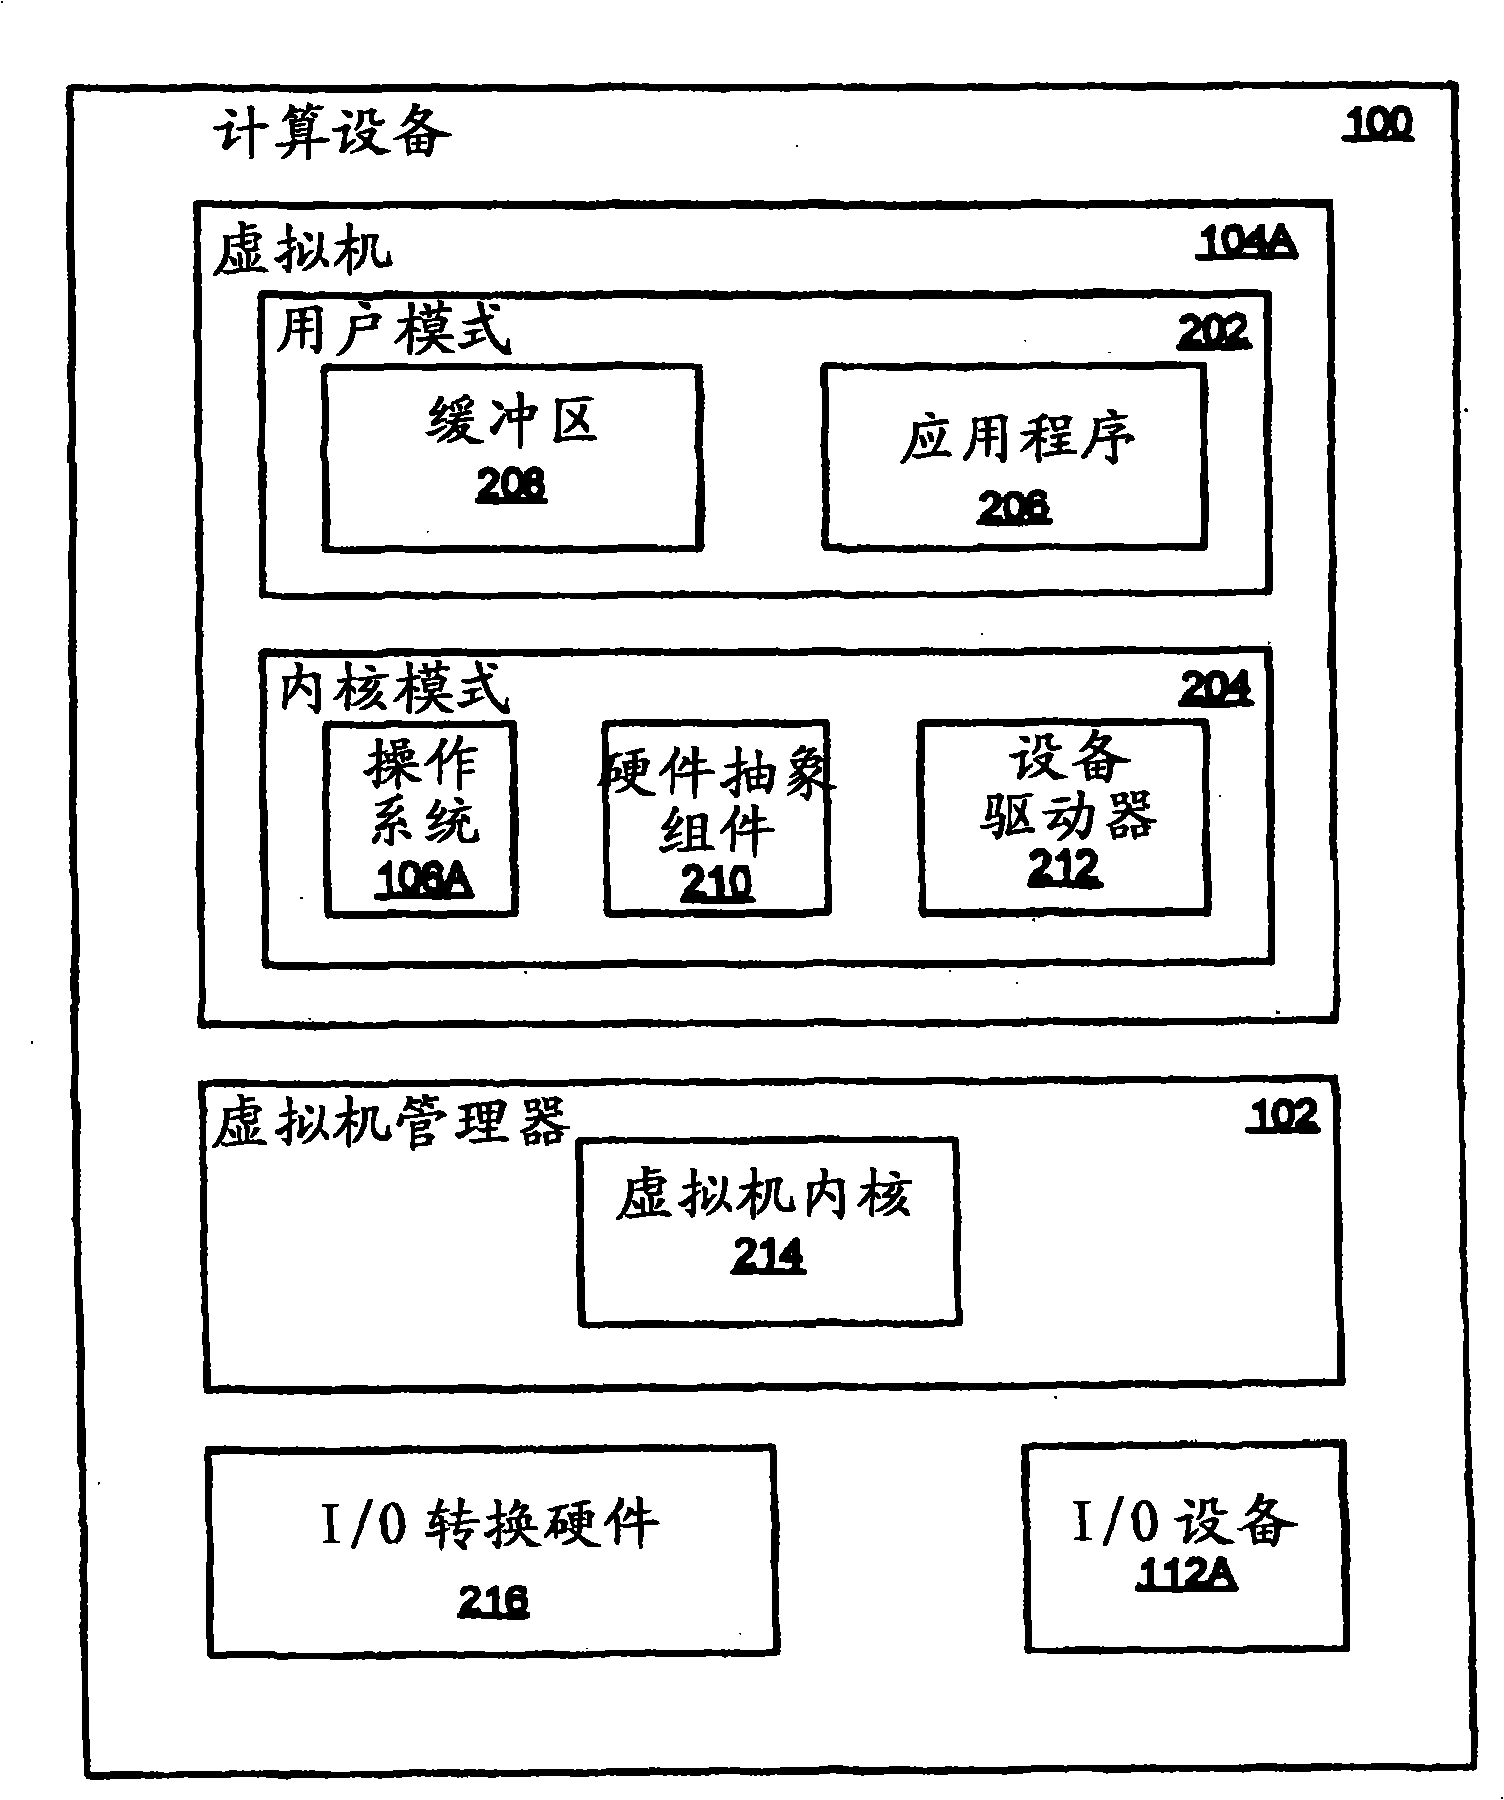 Direct-memory access between input/output device and physical memory within virtual machine environment